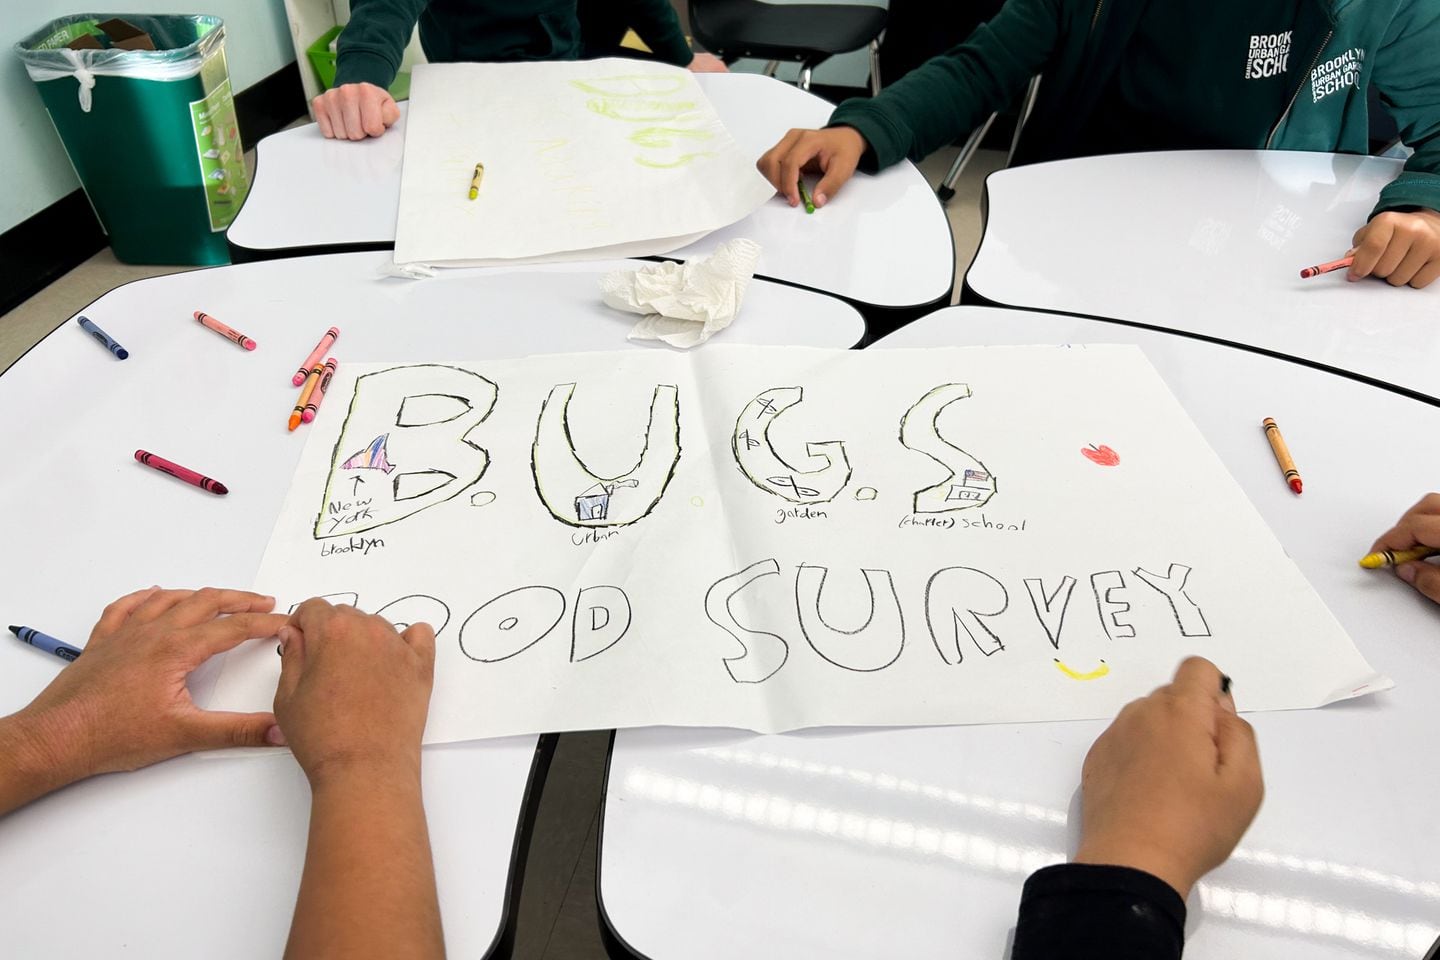 BUGS students with one of the signs they made to advertise their food equity survey. Kelly Field for The Hechinger Report